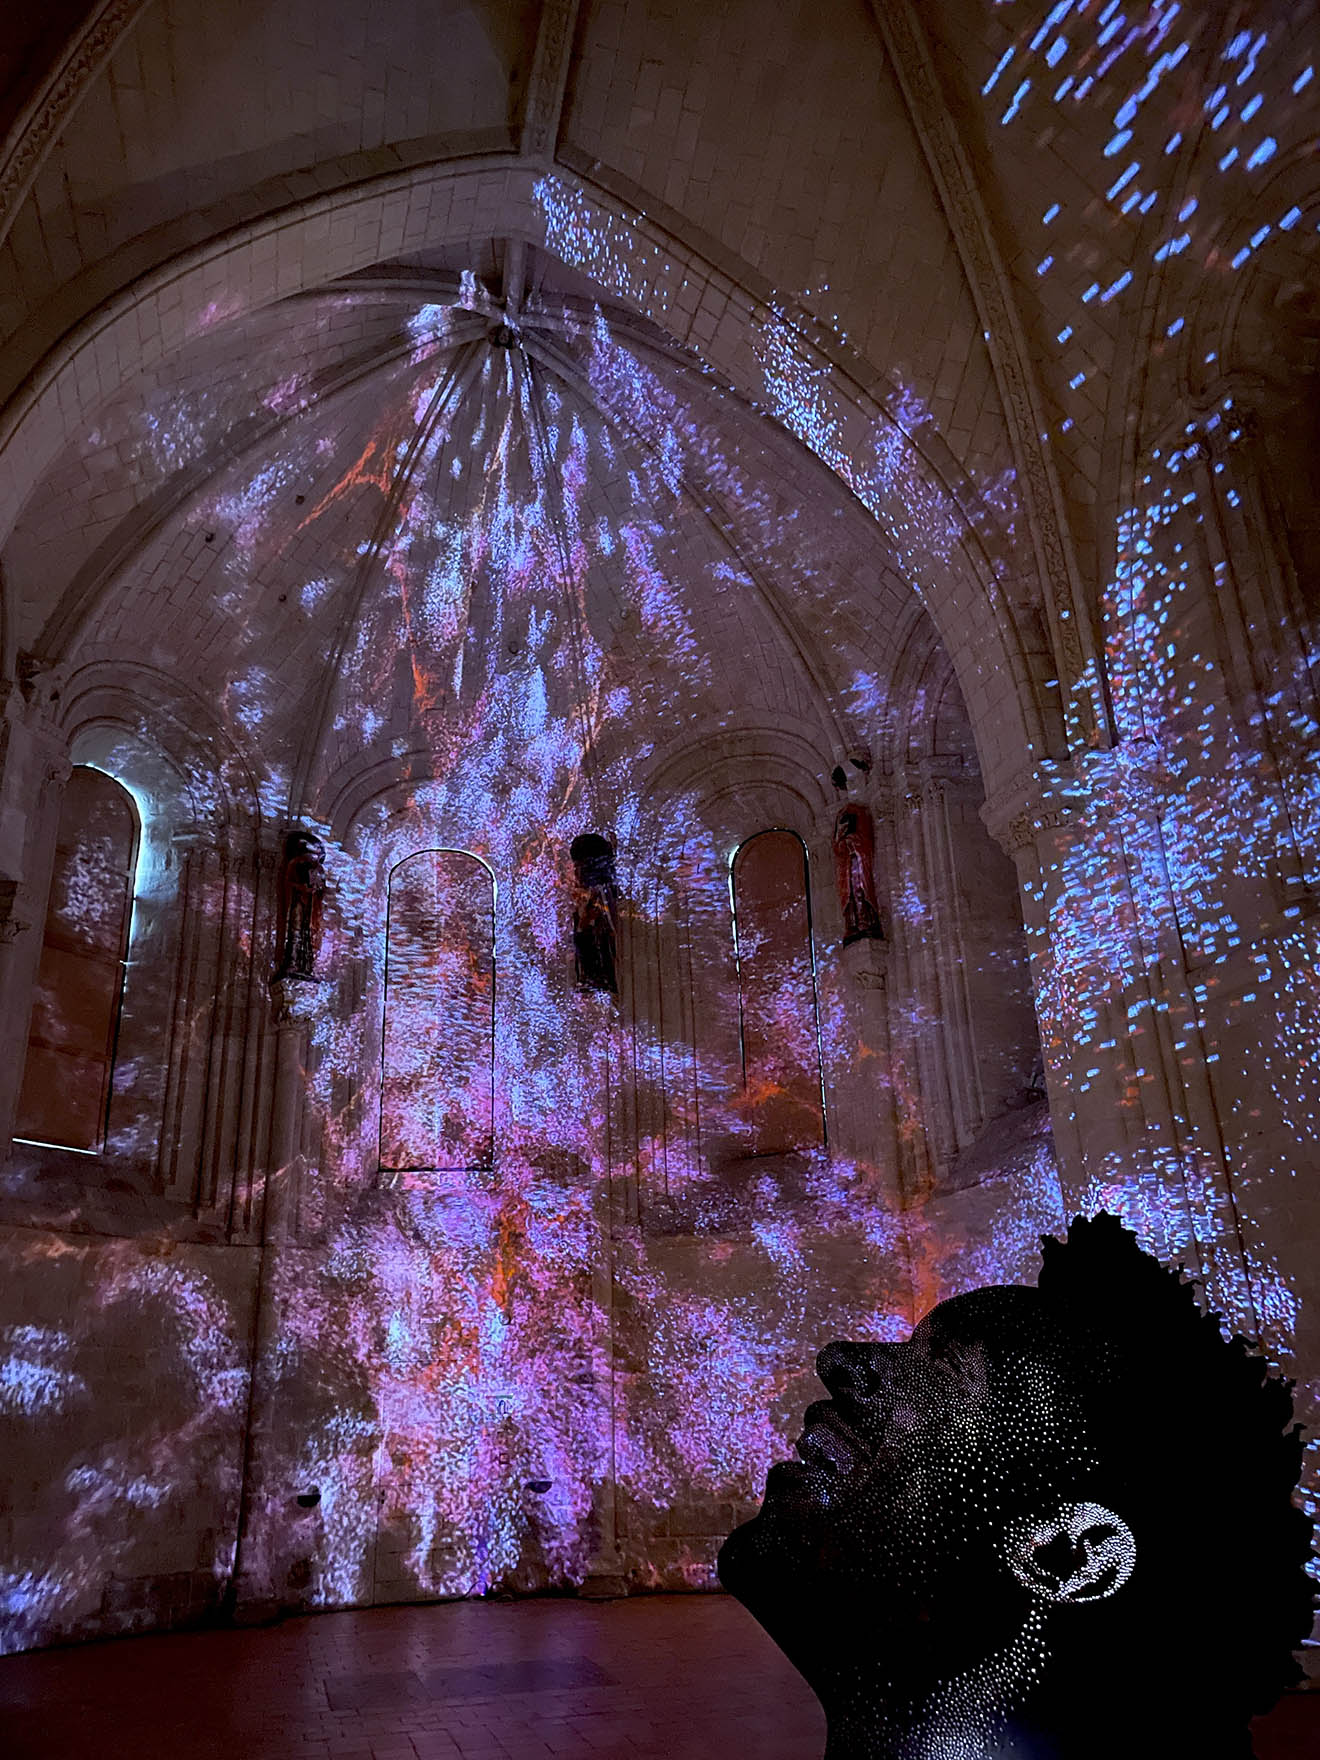 Dark cathedral with purple, red and blue lights shining n the walls and ceiling, outline of a person looking up and smiling